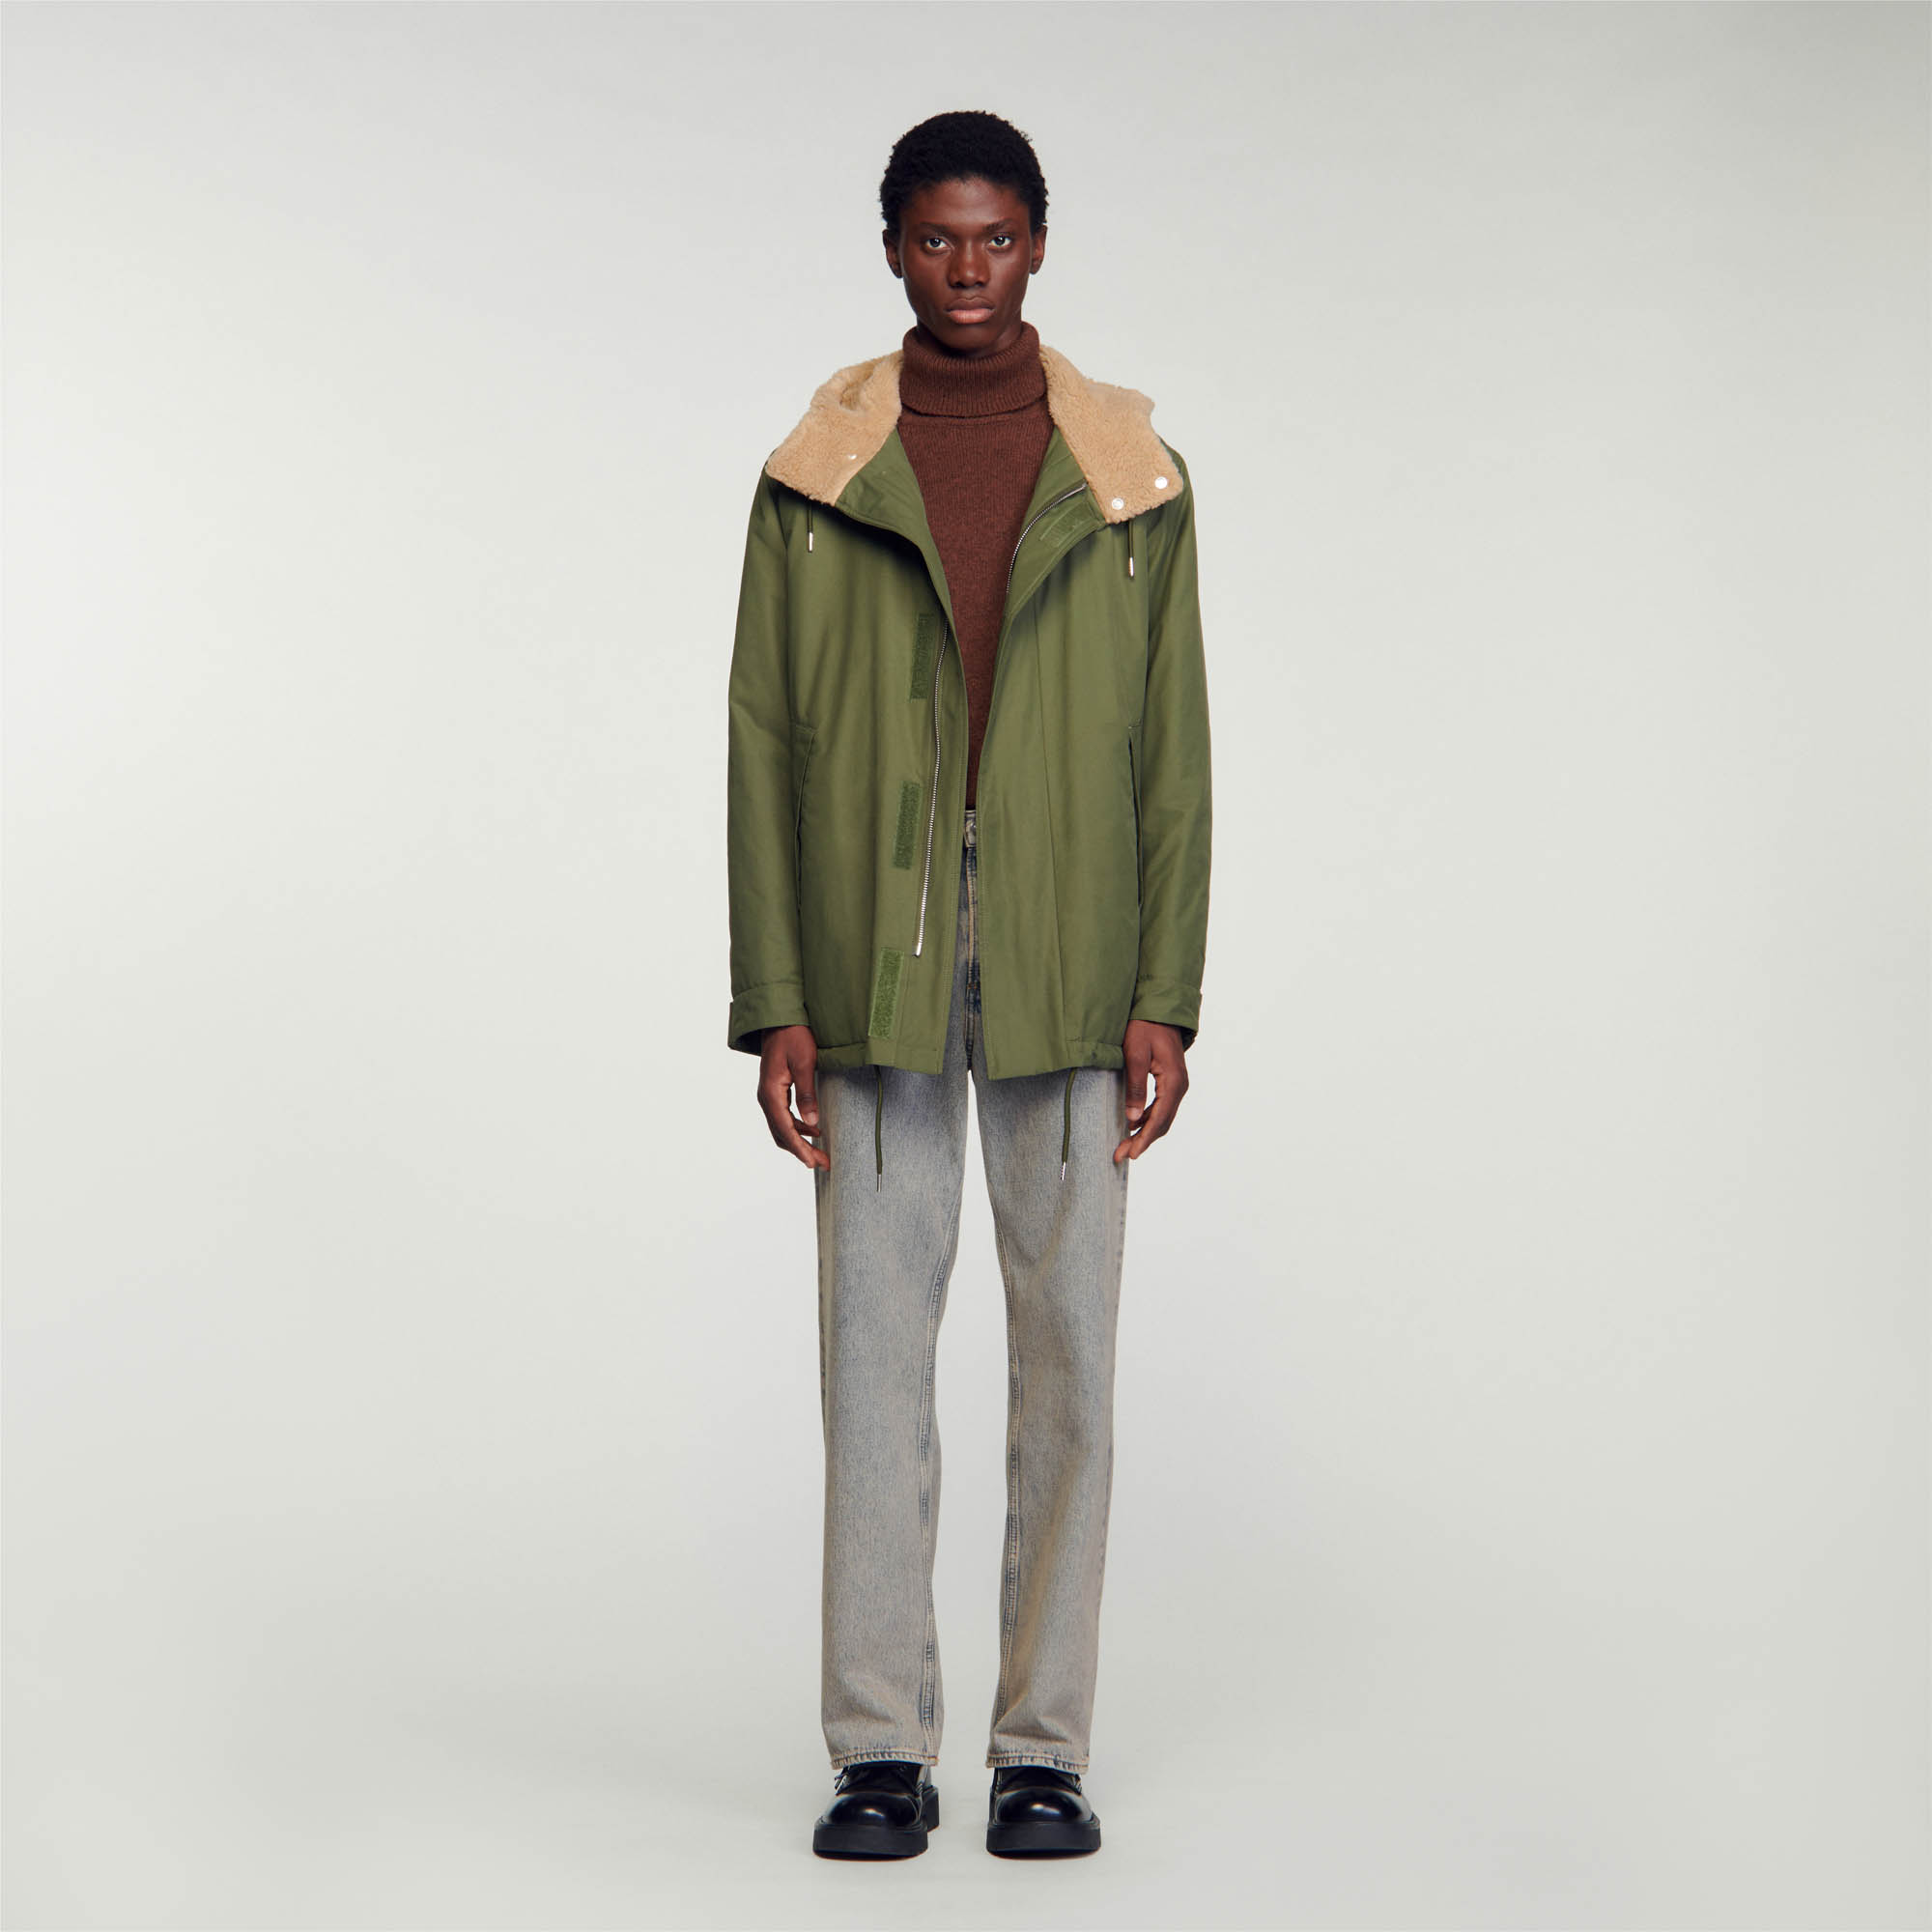 Sandro cotton Lined cotton parka with long sleeves, zip fastening and drawstrings